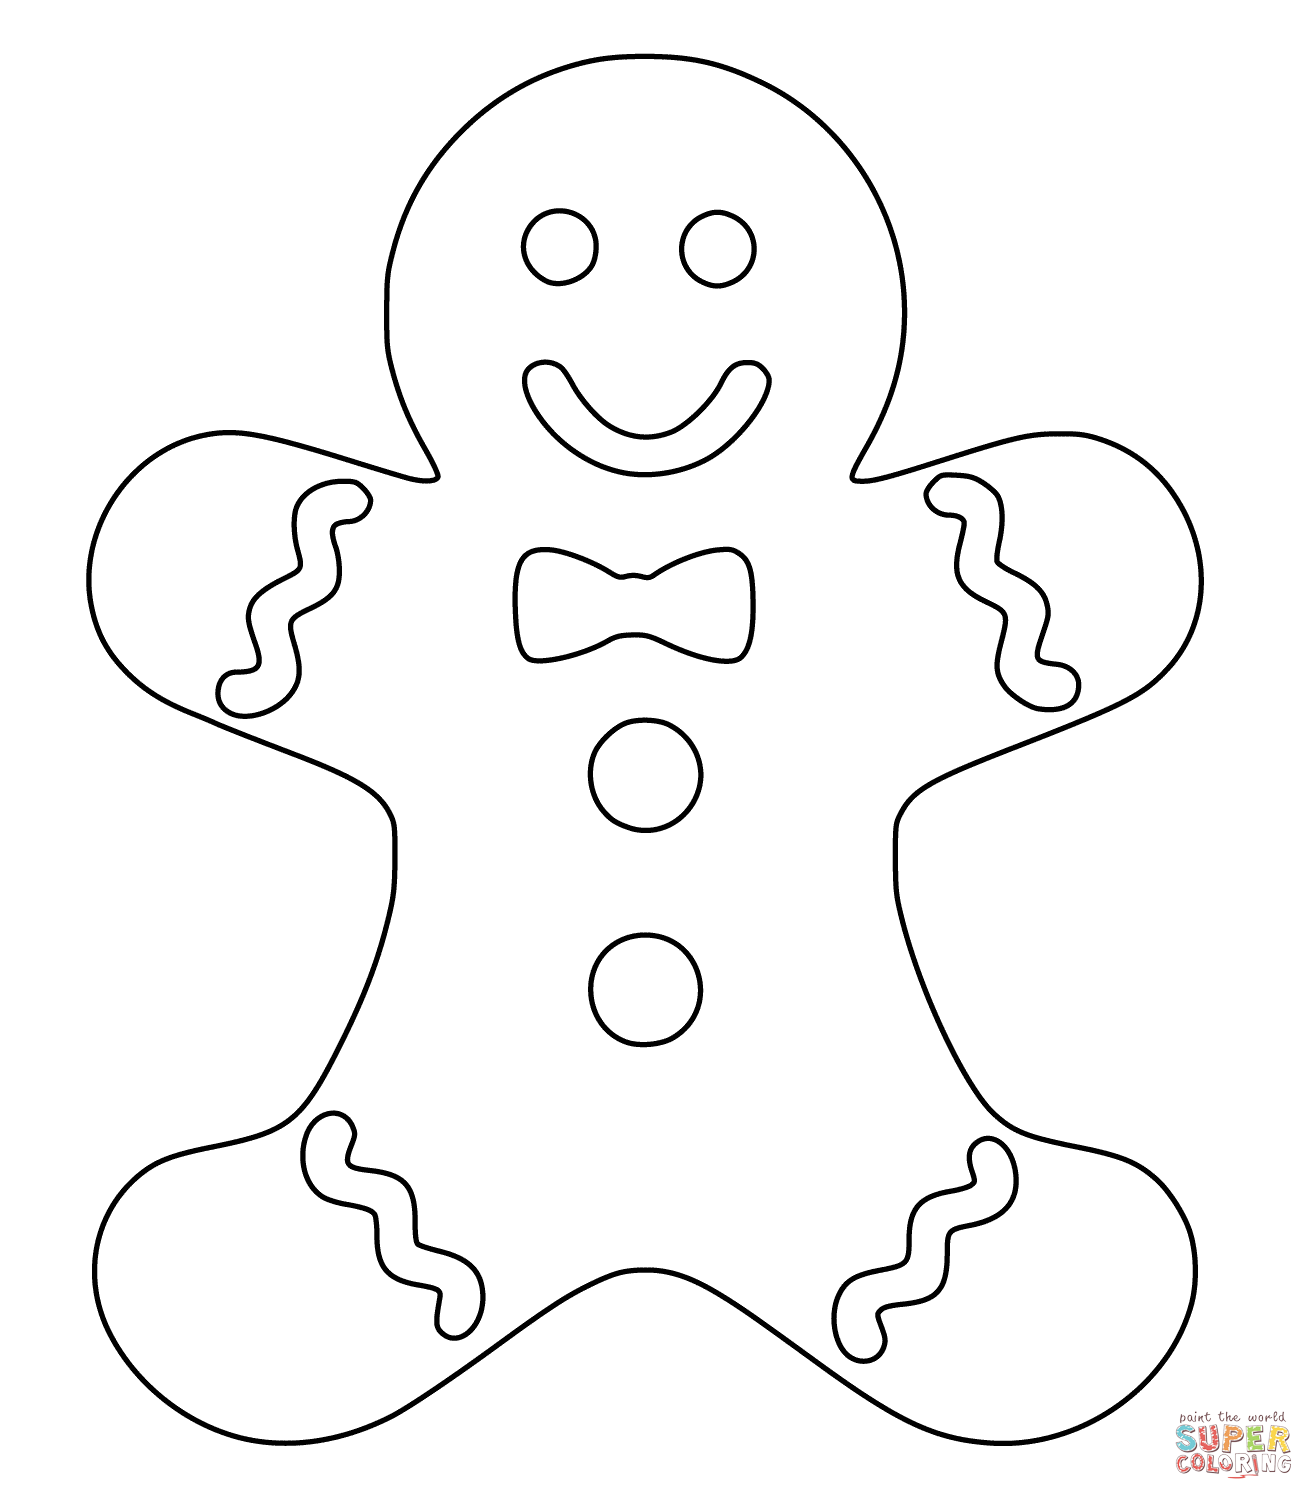 Christmas Gingerbread Man coloring page | Free Printable Coloring ...